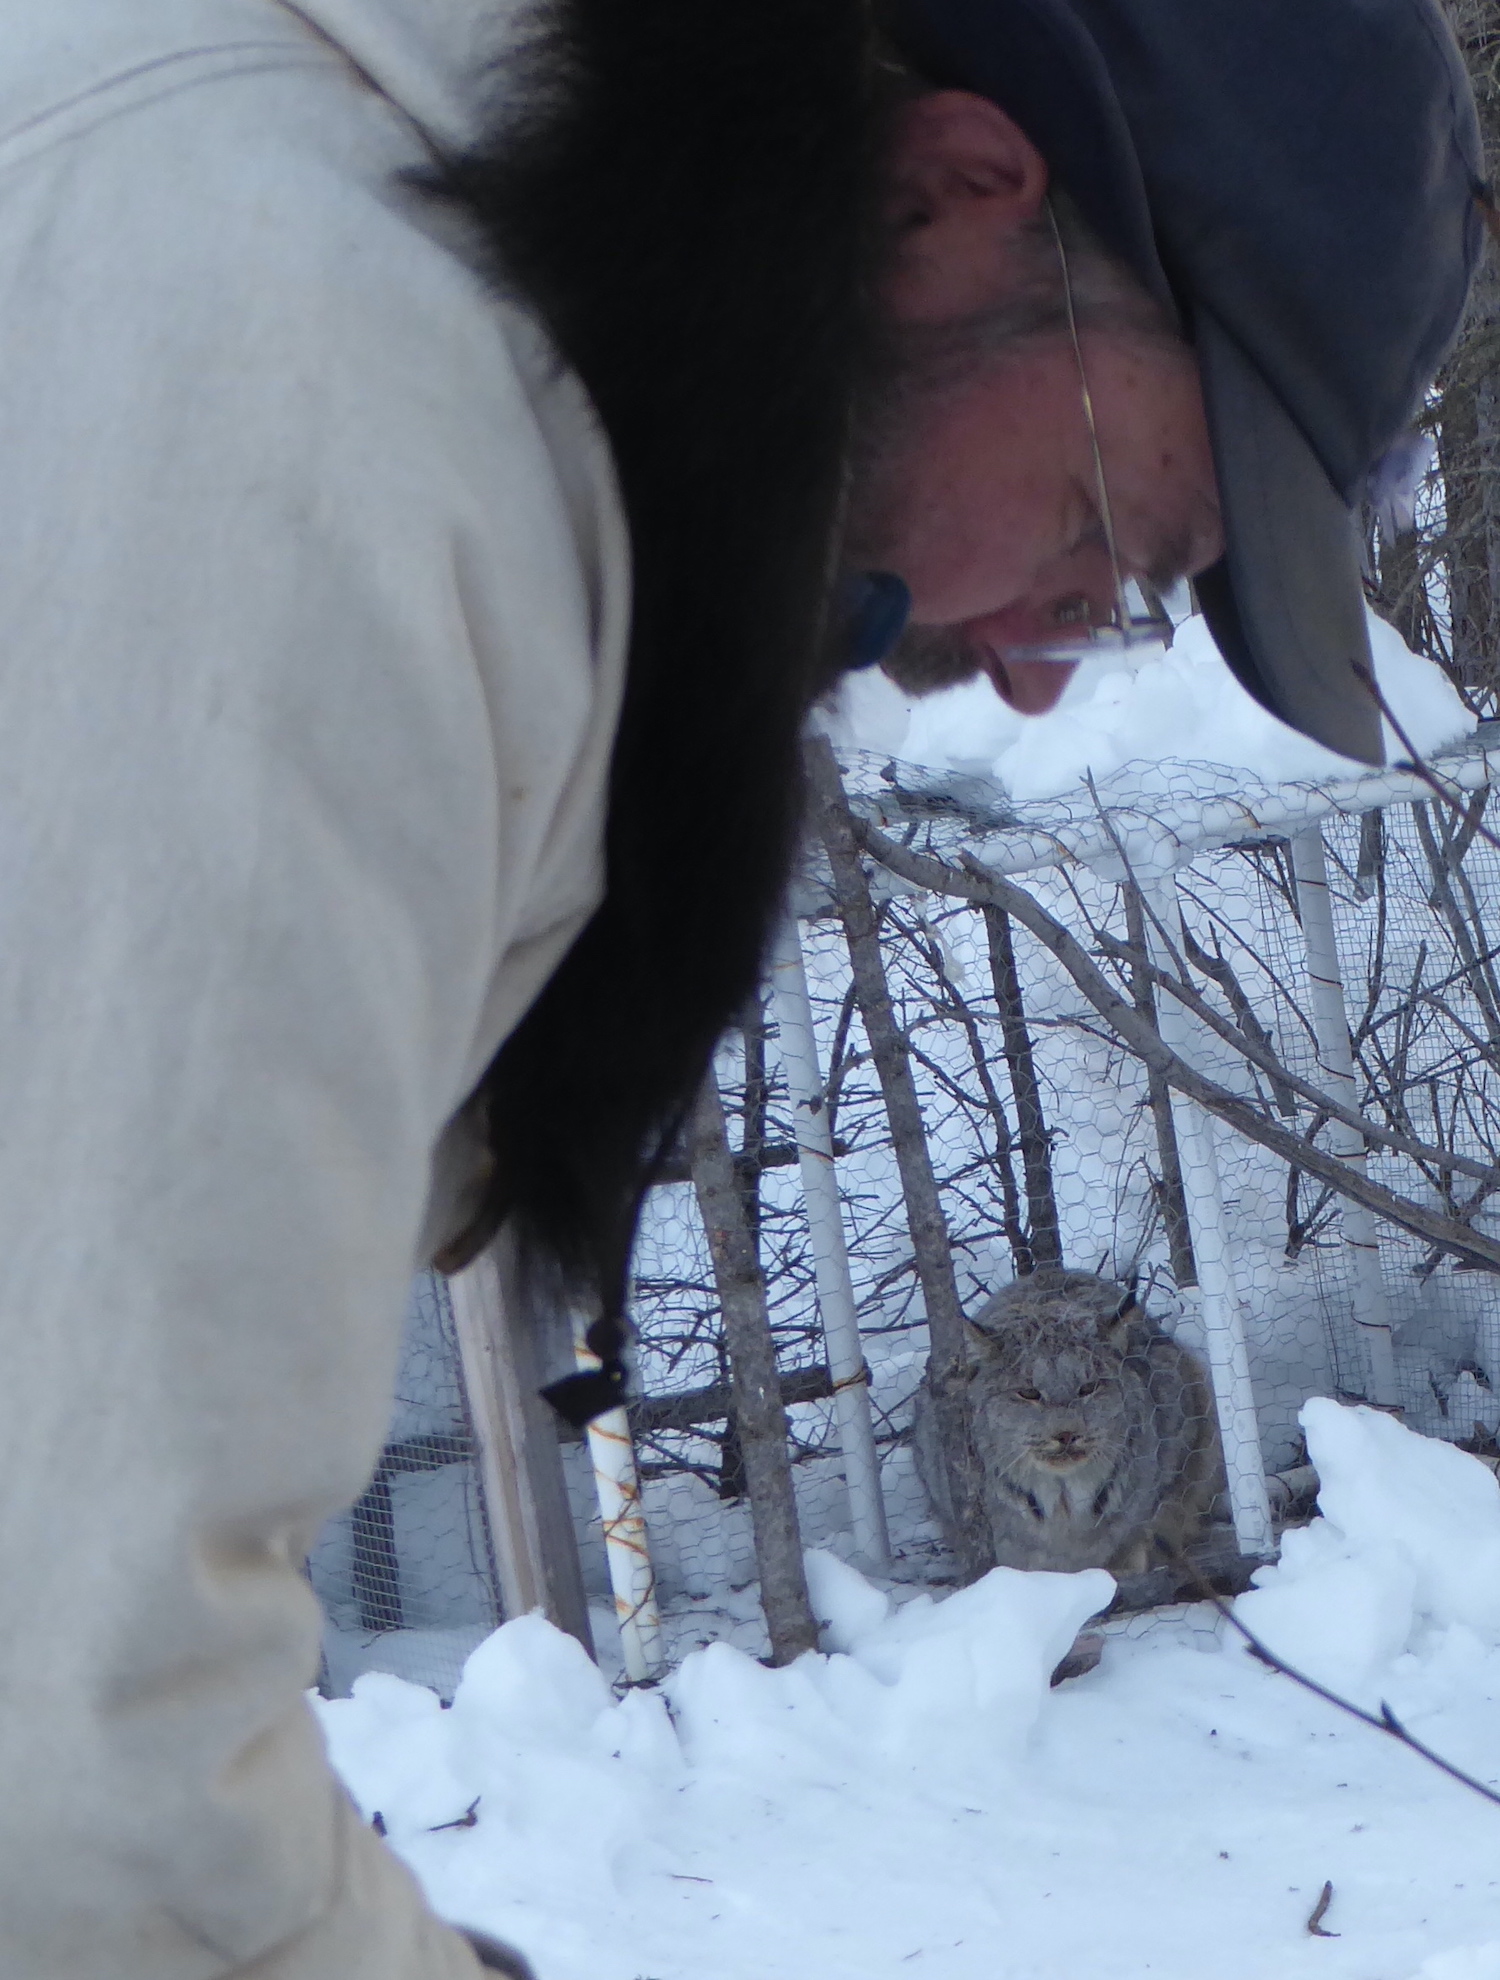 A lynx crouches in a chicken-wire cage set on snow while a man in the foreground leans over.